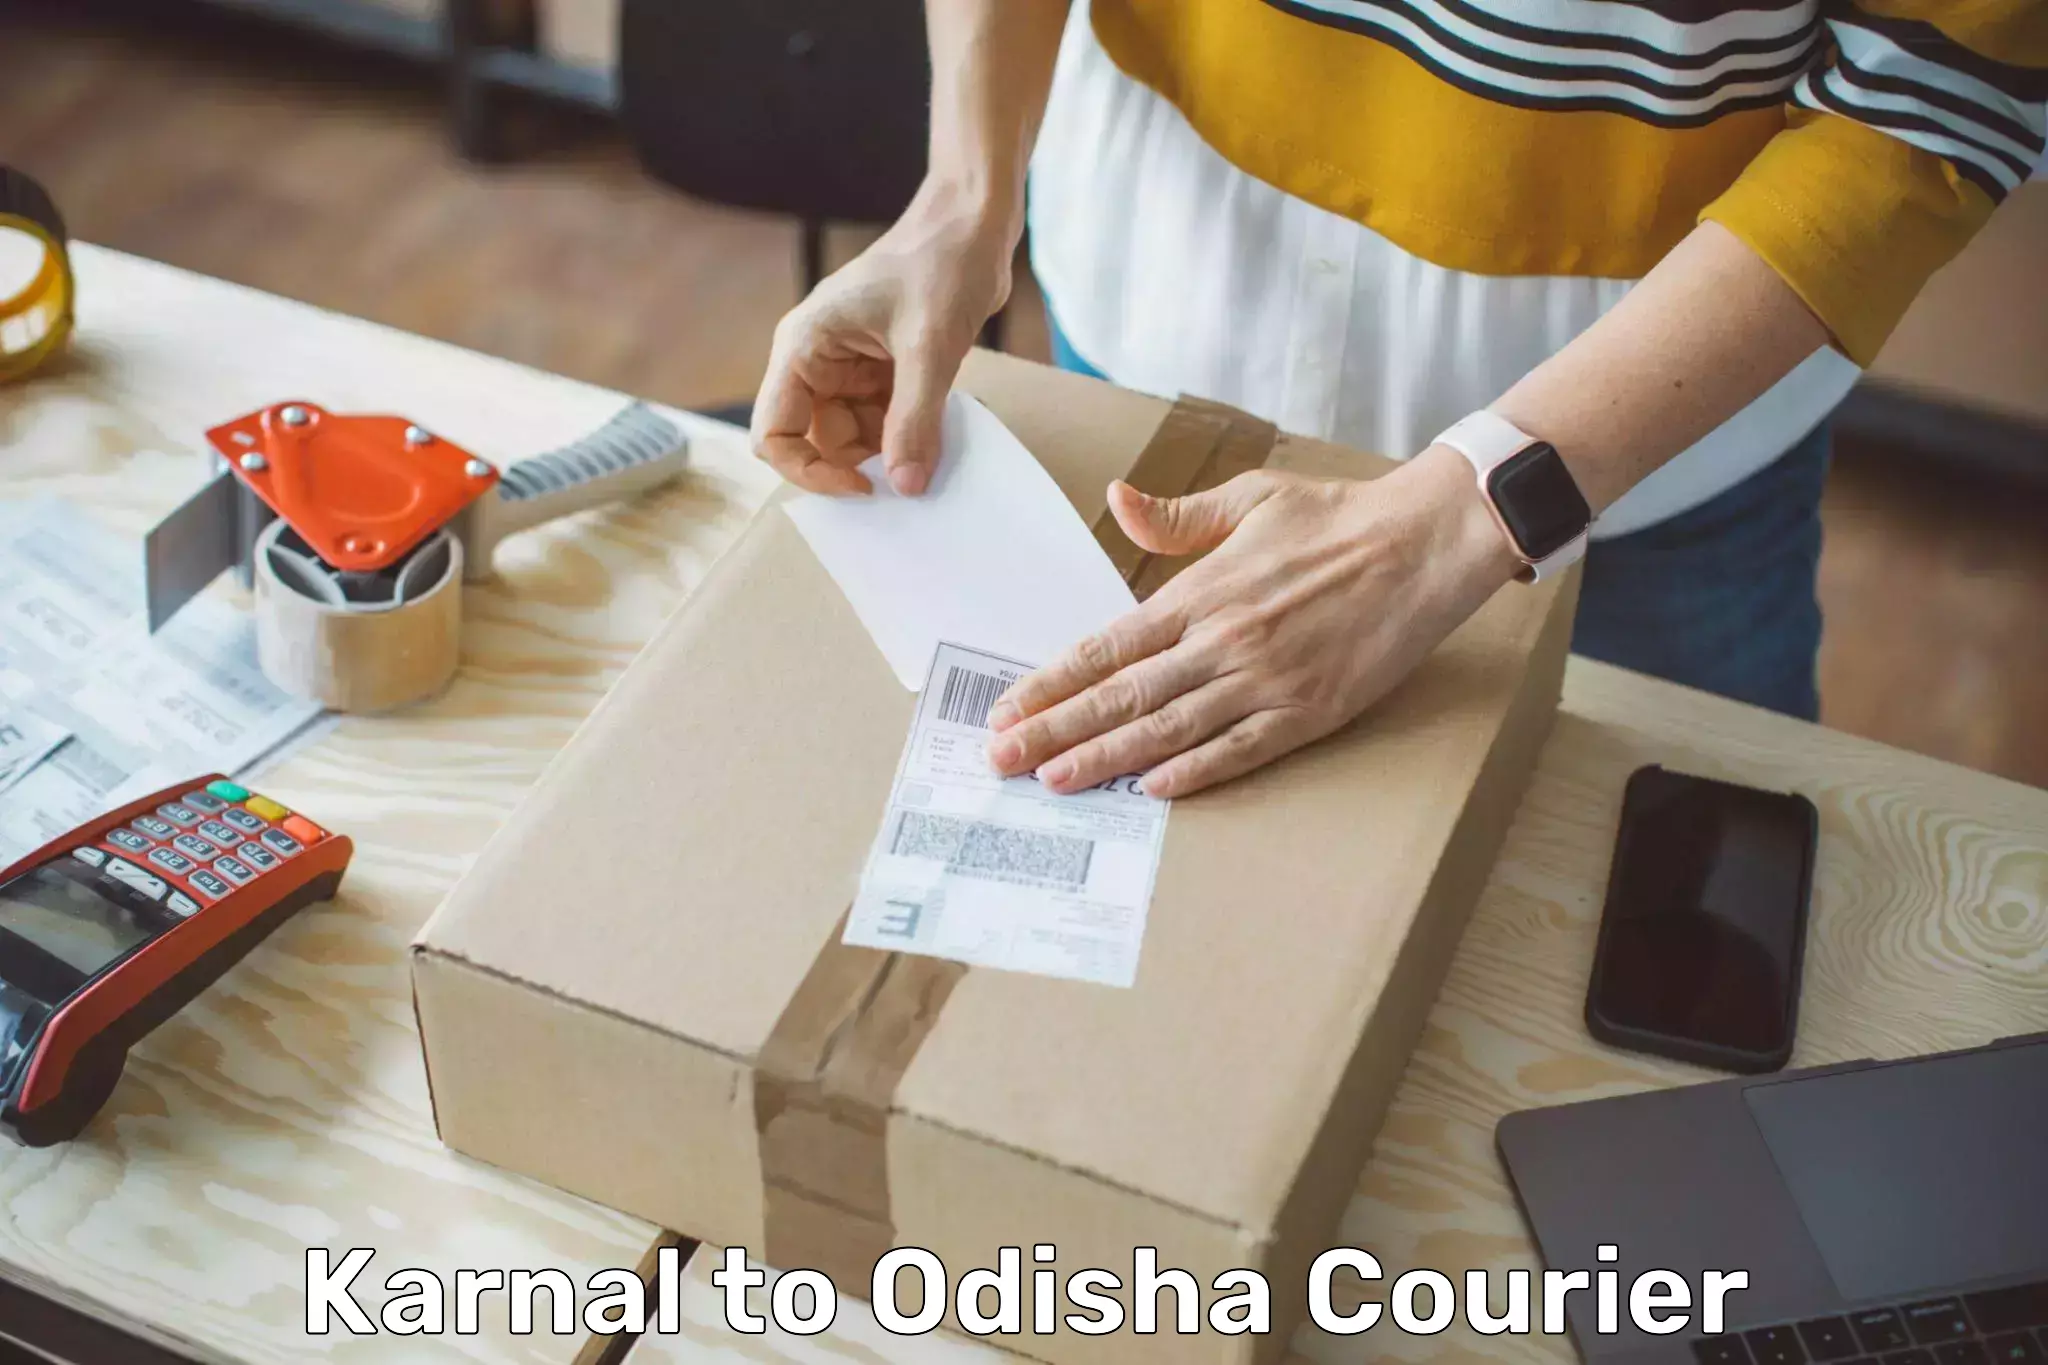 Personal courier services Karnal to Bhuban